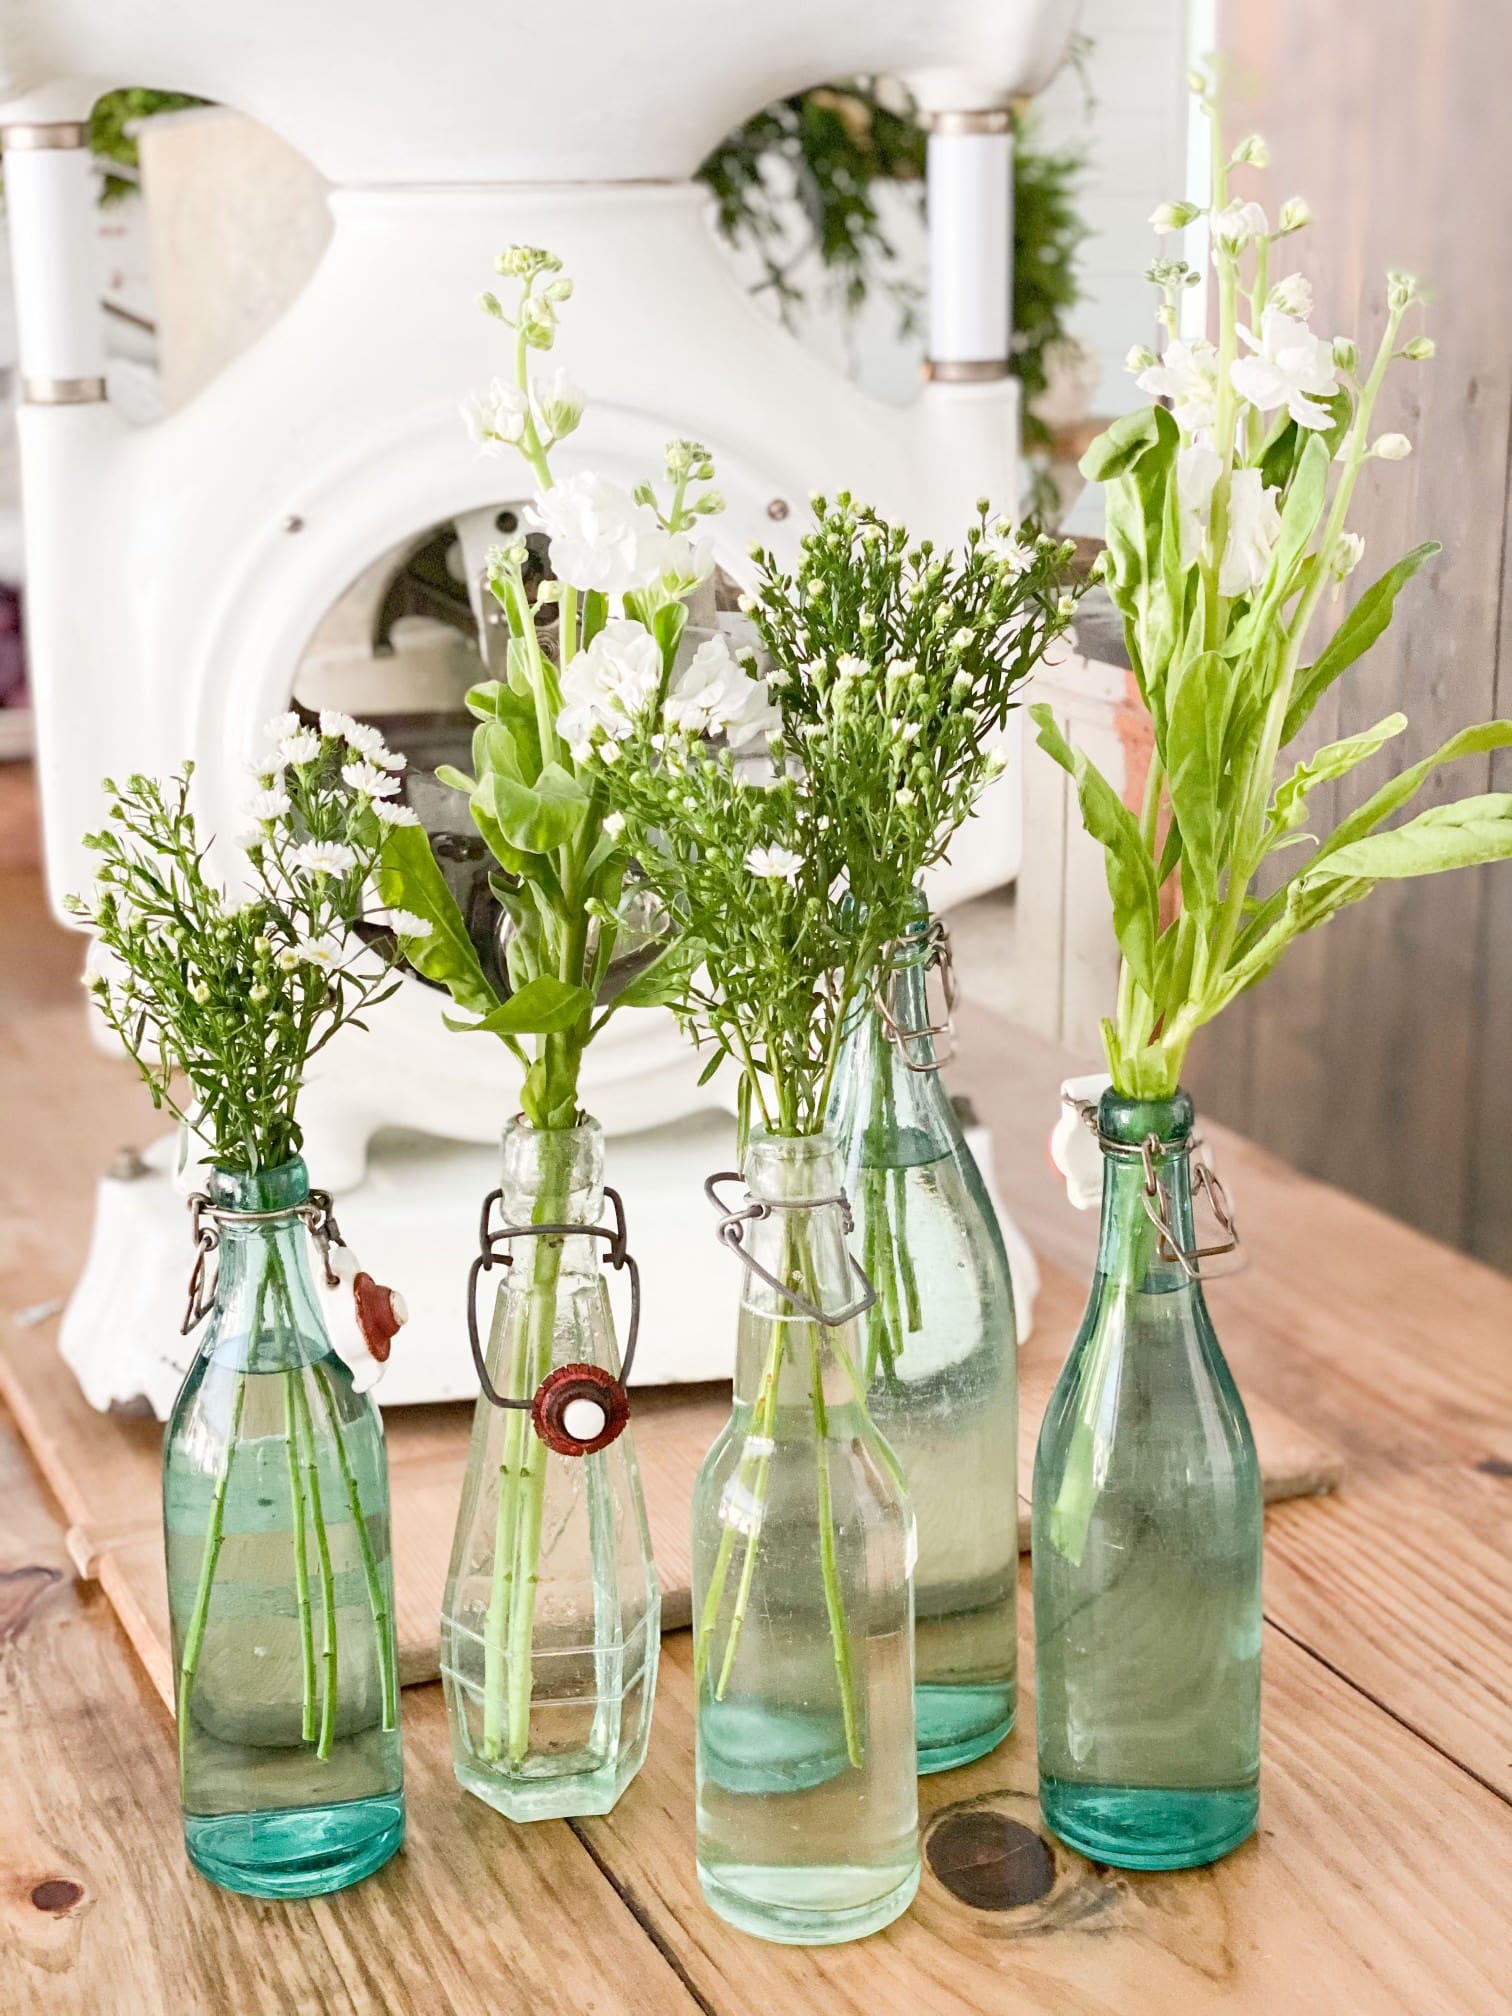 small bouquets of small white flowers arranged in vintage glass bottles